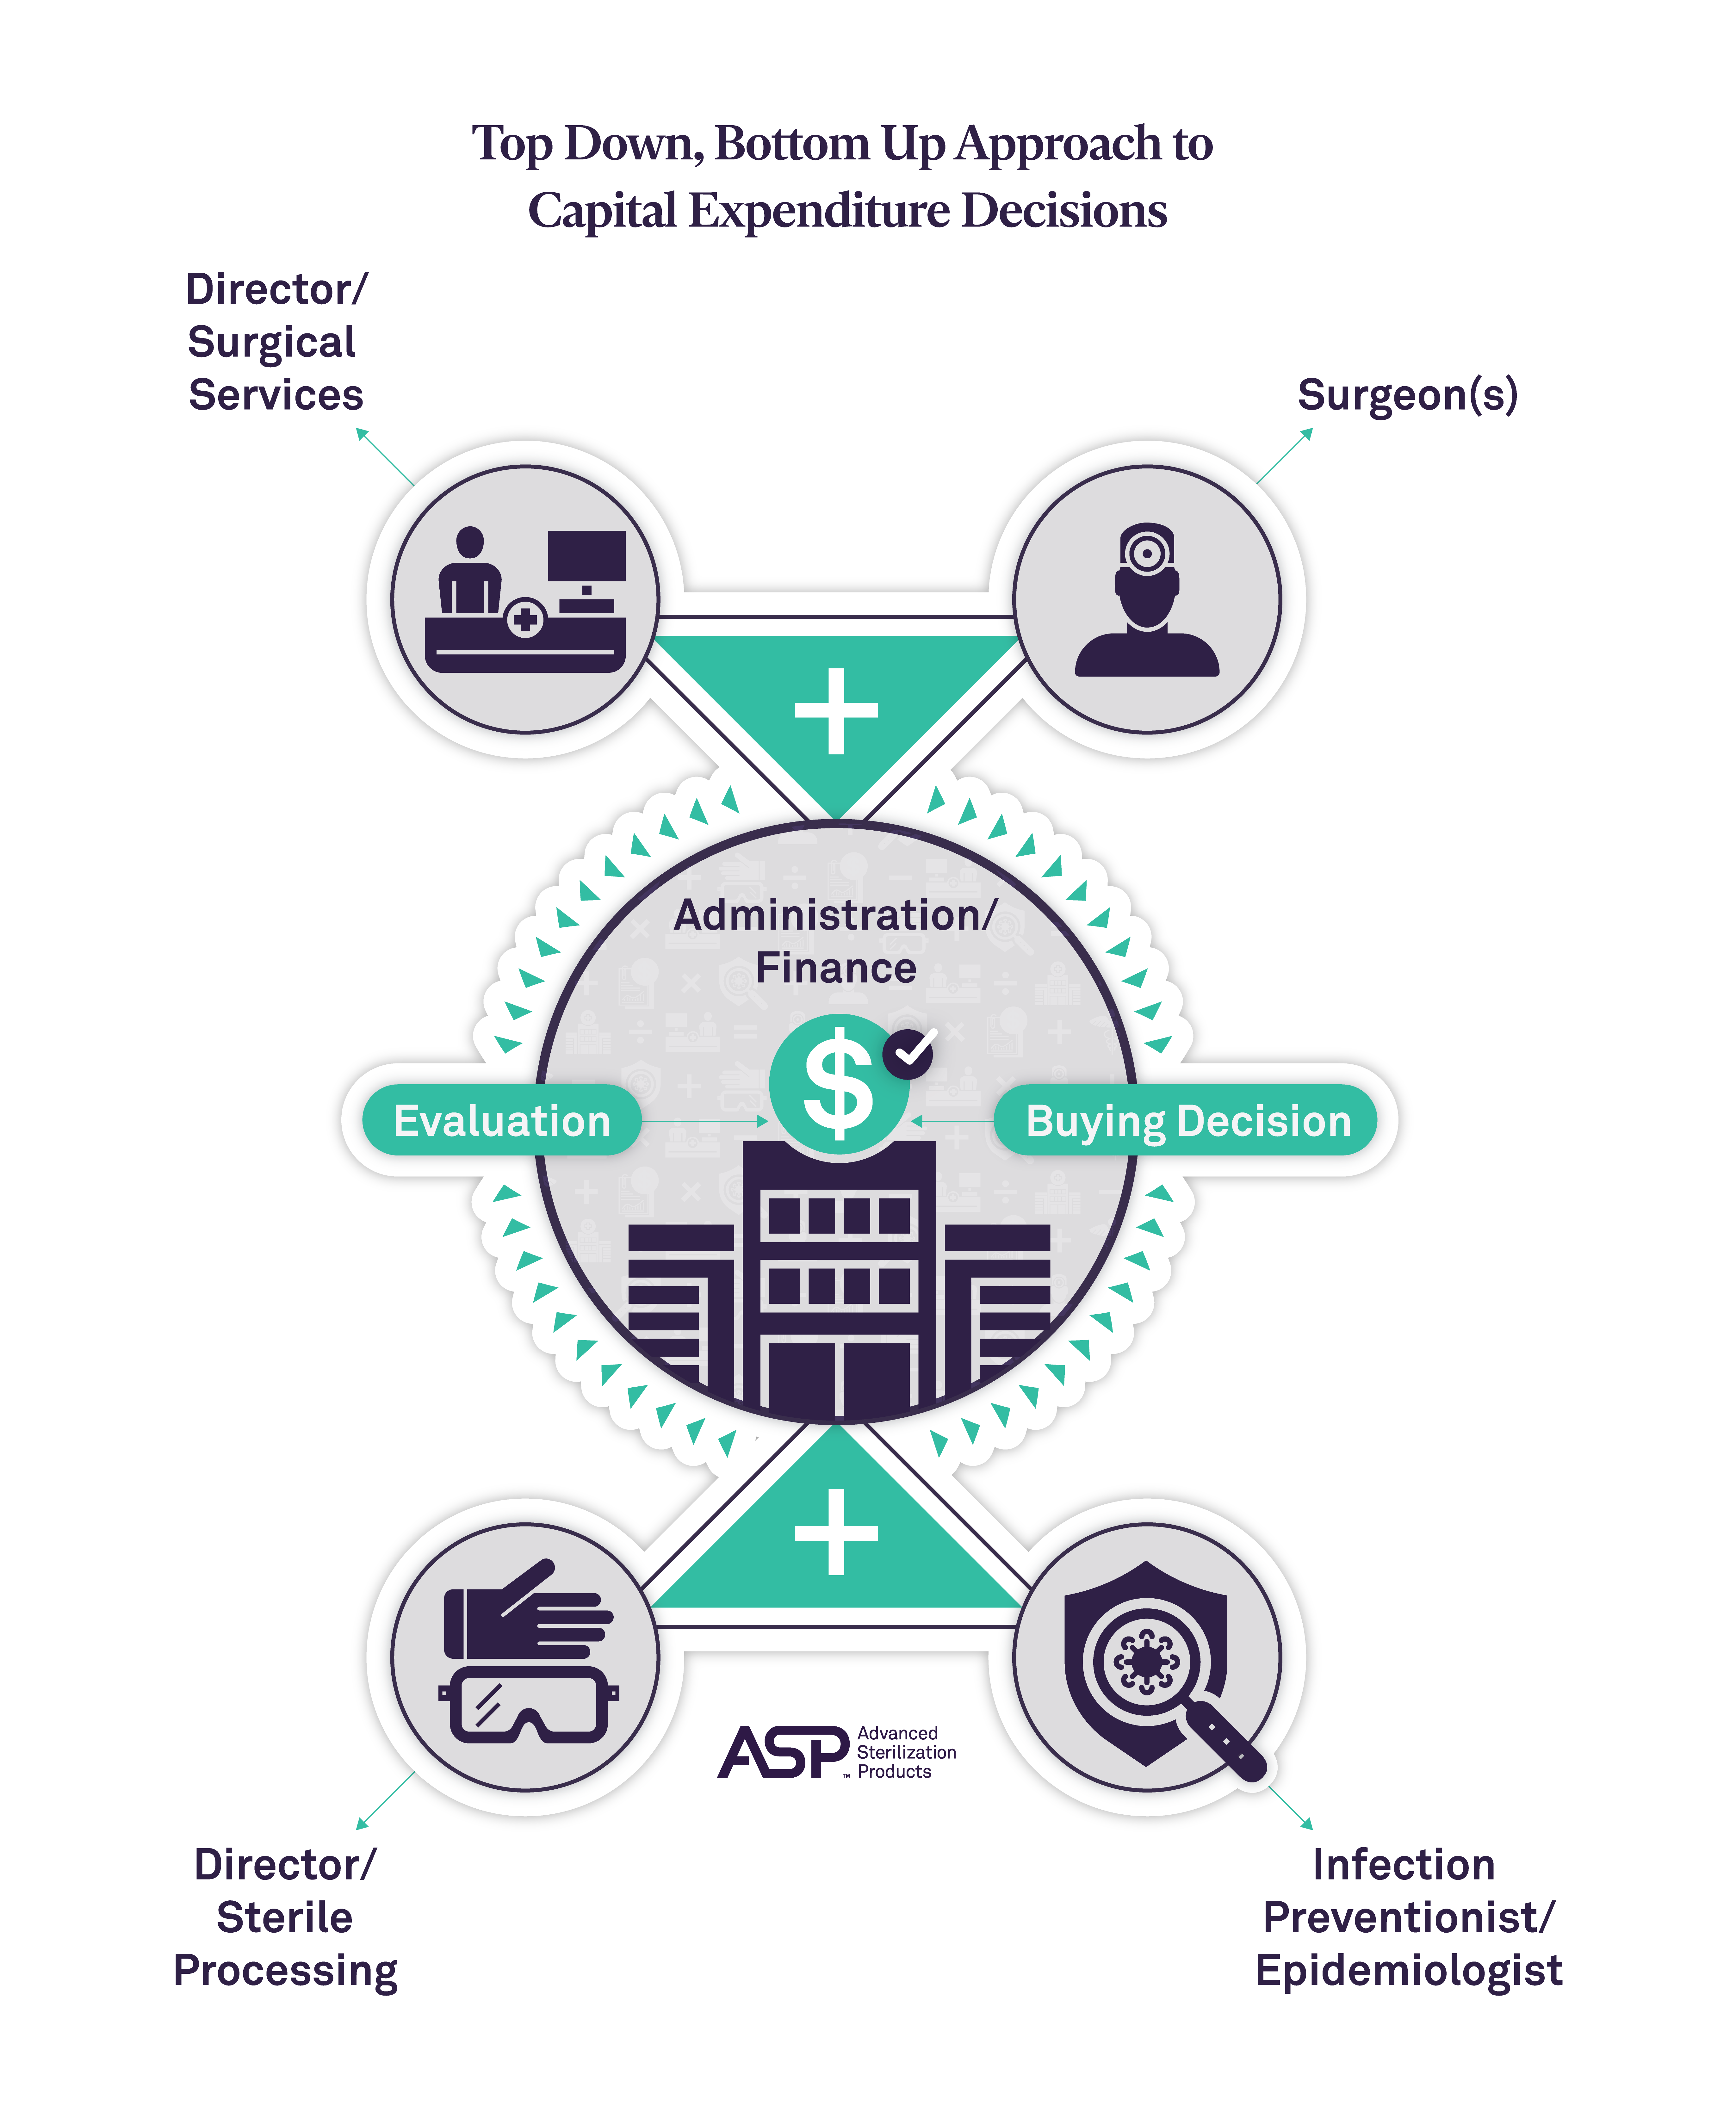 Diagram showing the top down, bottom up approach to capital expenditure decisions